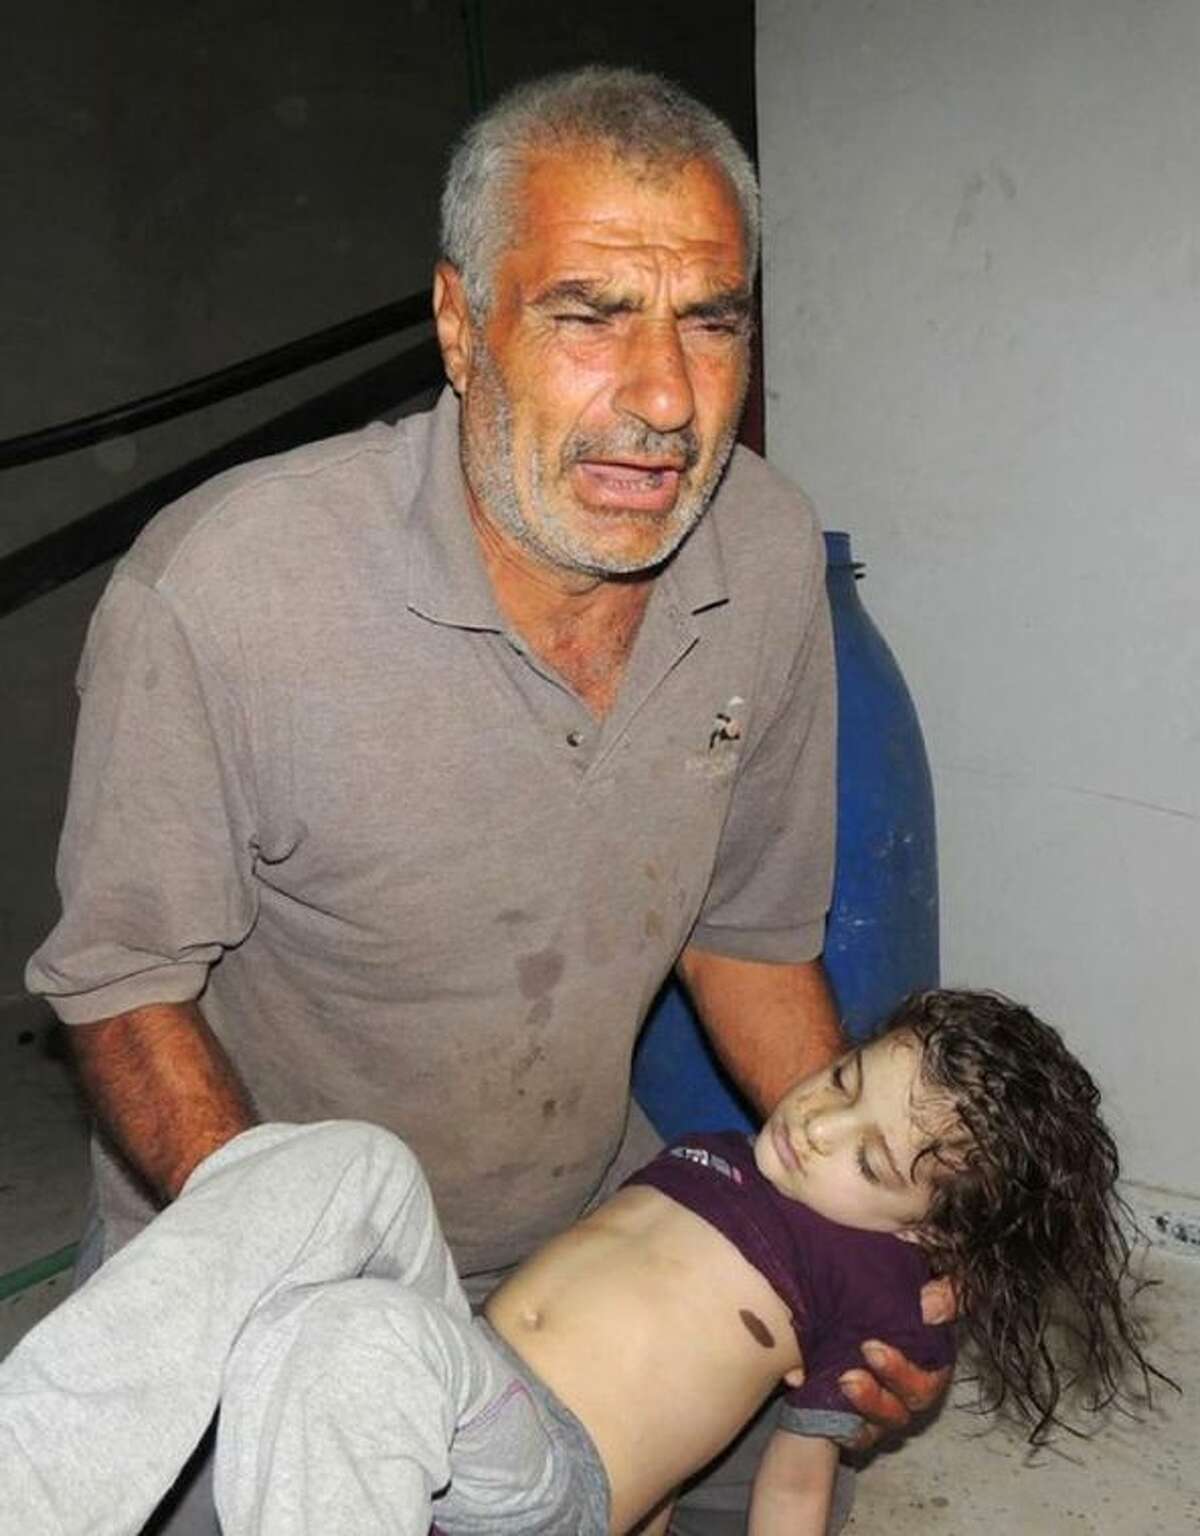 In this Aug. 21, 2013, file citizen journalism image provided by the Local Committee of Arbeen which has been authenticated based on its contents and other AP reporting, a Syrian man reacts as he carries a dead body of a Syrian girl, after an alleged poisonous gas attack fired by regime forces, according to activists in Arbeen town, Damascus, Syria. The early-morning barrage against rebel-held areas around the the Syrian capital Damascus immediately seemed different: The rockets made a strange, whistling noise. Seconds after one hit near his home, Qusai Zakarya says he couldn’t breathe, and he desperately punched himself in the chest to get air. Hundreds of suffocating, twitching victims flooded into hospitals. Others were later found dead in their homes, towels still on their faces from their last moments trying to protect themselves from gas. Doctors and survivors recount scenes of horror from the alleged chemical attack a week ago.